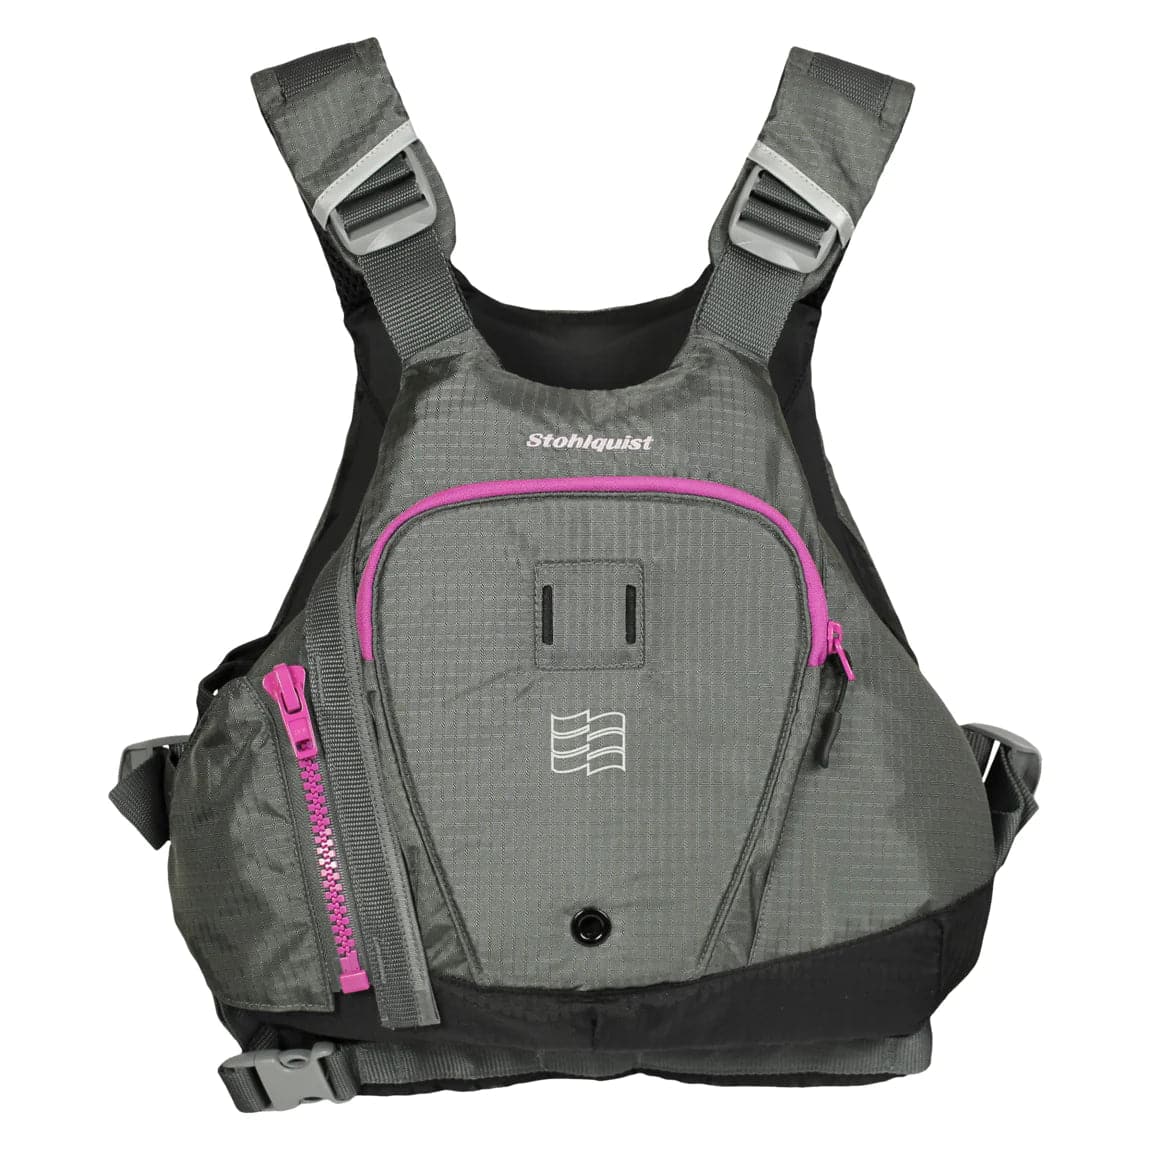 Featuring the Edge PFD men's pfd manufactured by Stohlquist shown here from a fourth angle.